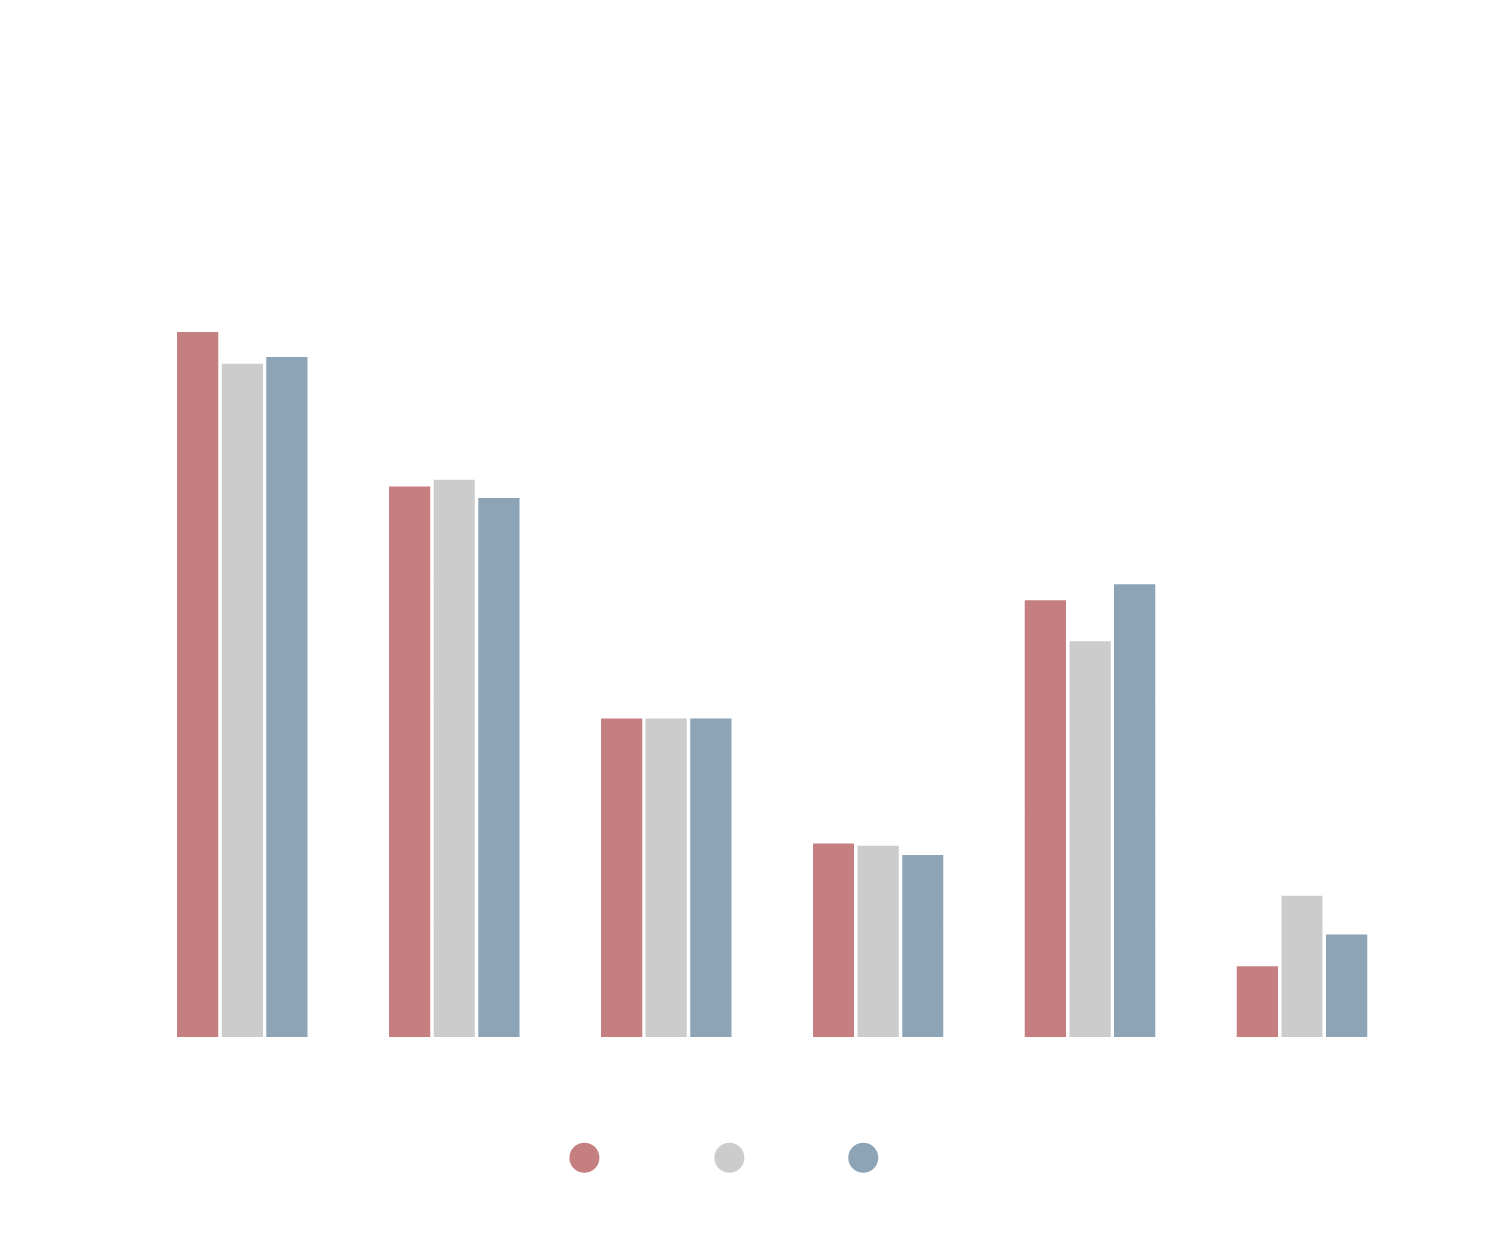 An infographic of how frequently people feel stressed based on a Compare the Market survey